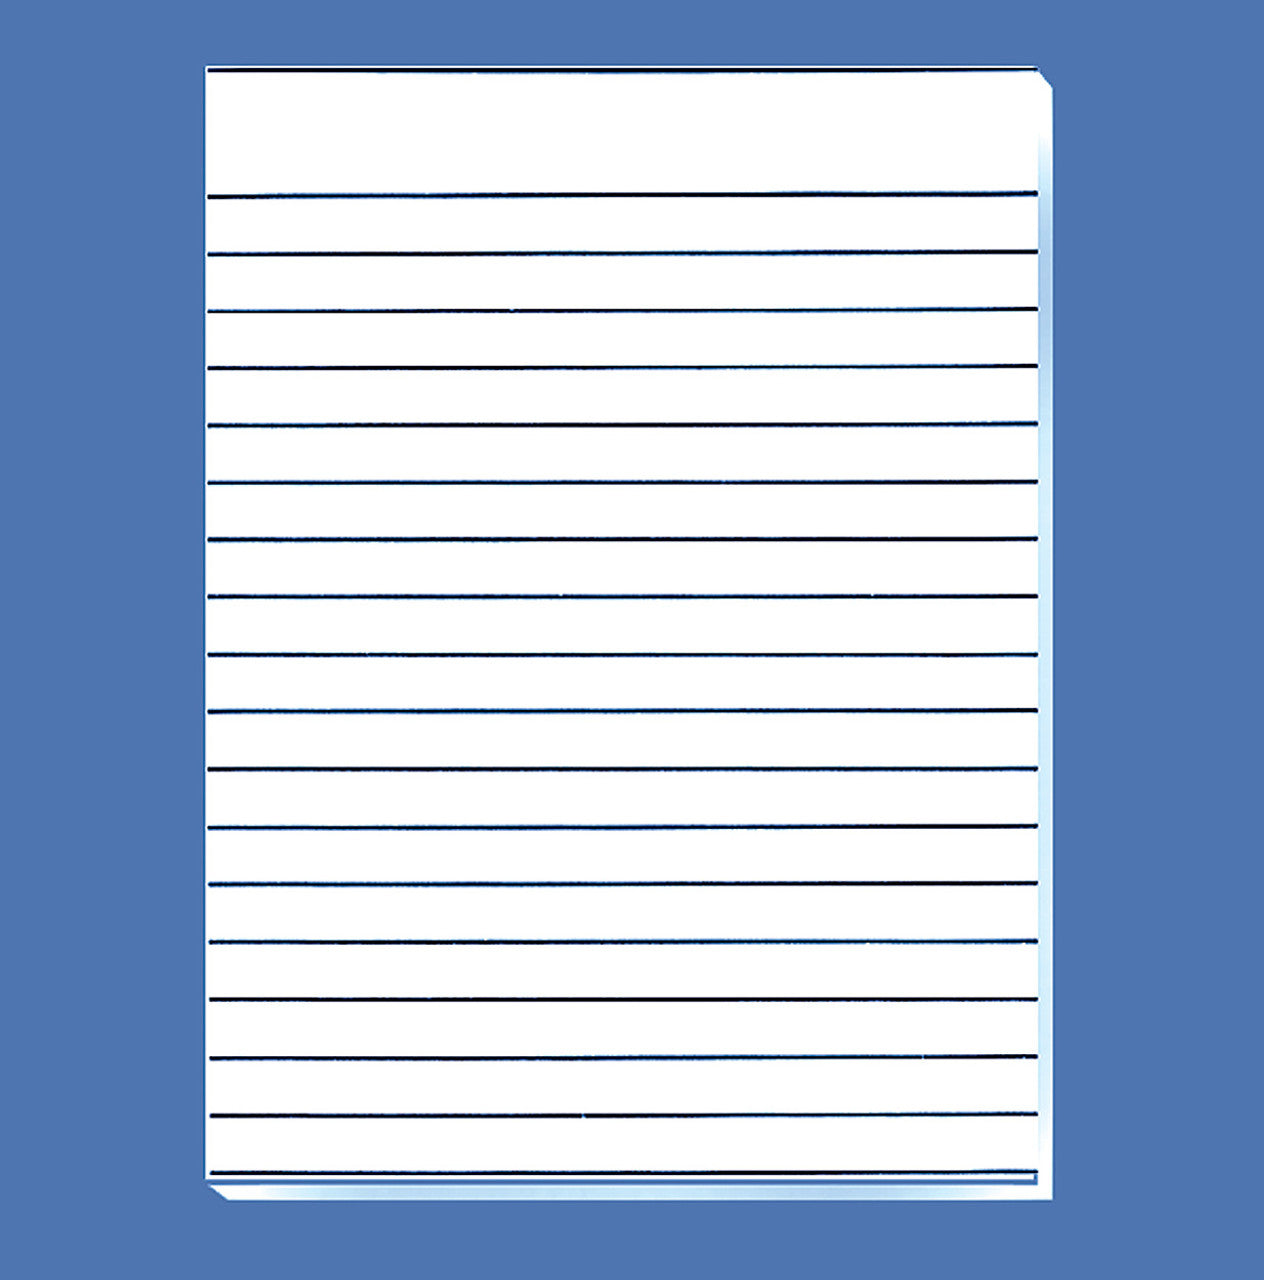 Bold line writing paper. Paper pads with bold black lines on both sides of the 8.5 x 11 inch sheets. Lines are .56 inches apart. Gummed pad of 100 sheets.  20Lines per page.  Great for school or work. suitable for those who are low vision and or visually impaired.